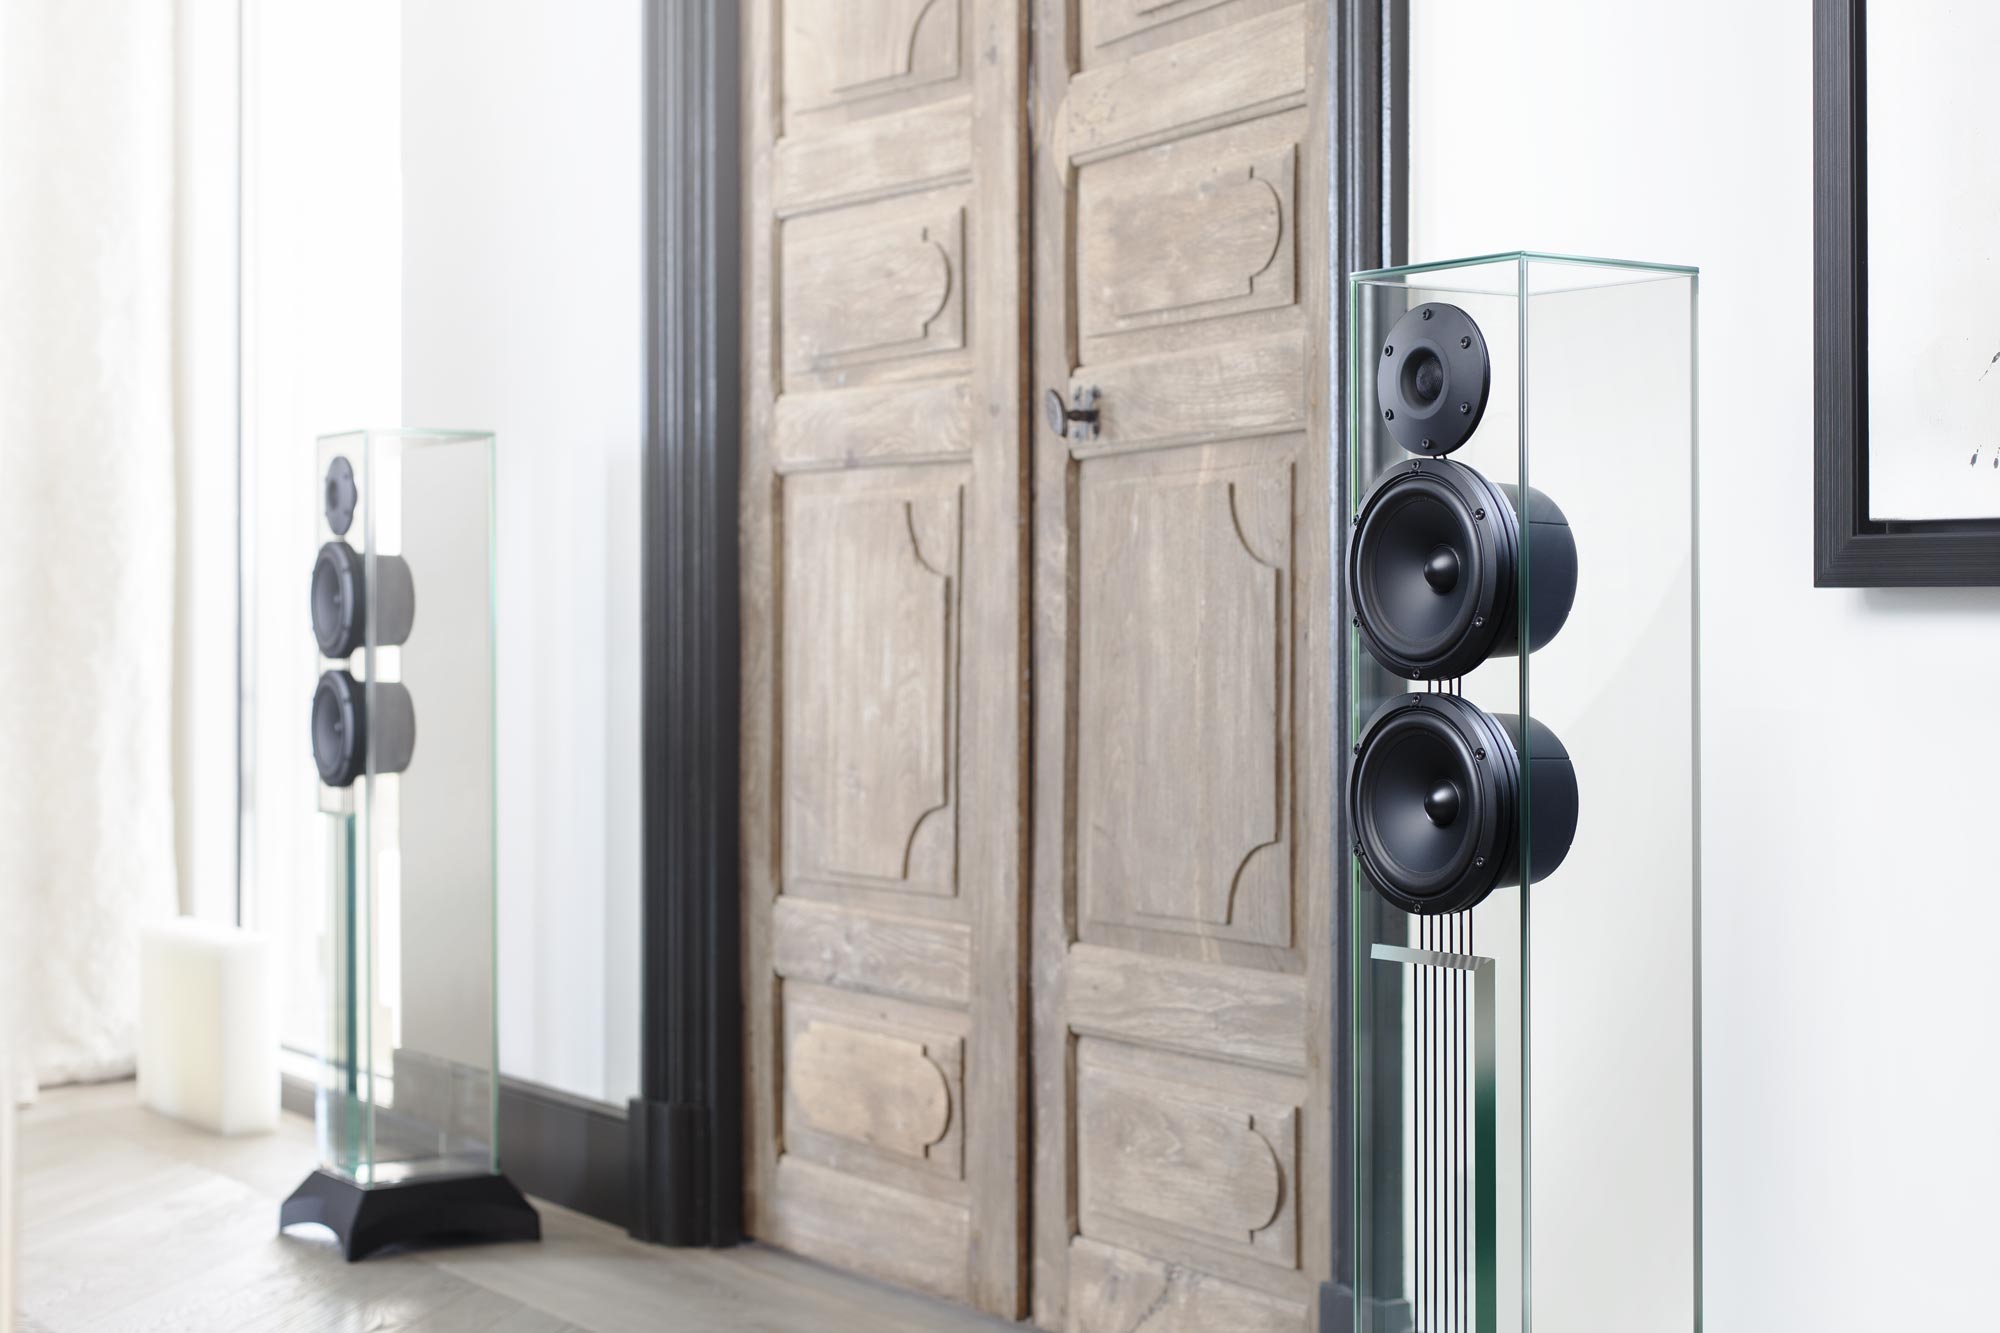 Speakers That Make a Statement: Selective Design Puts the Art in Audio